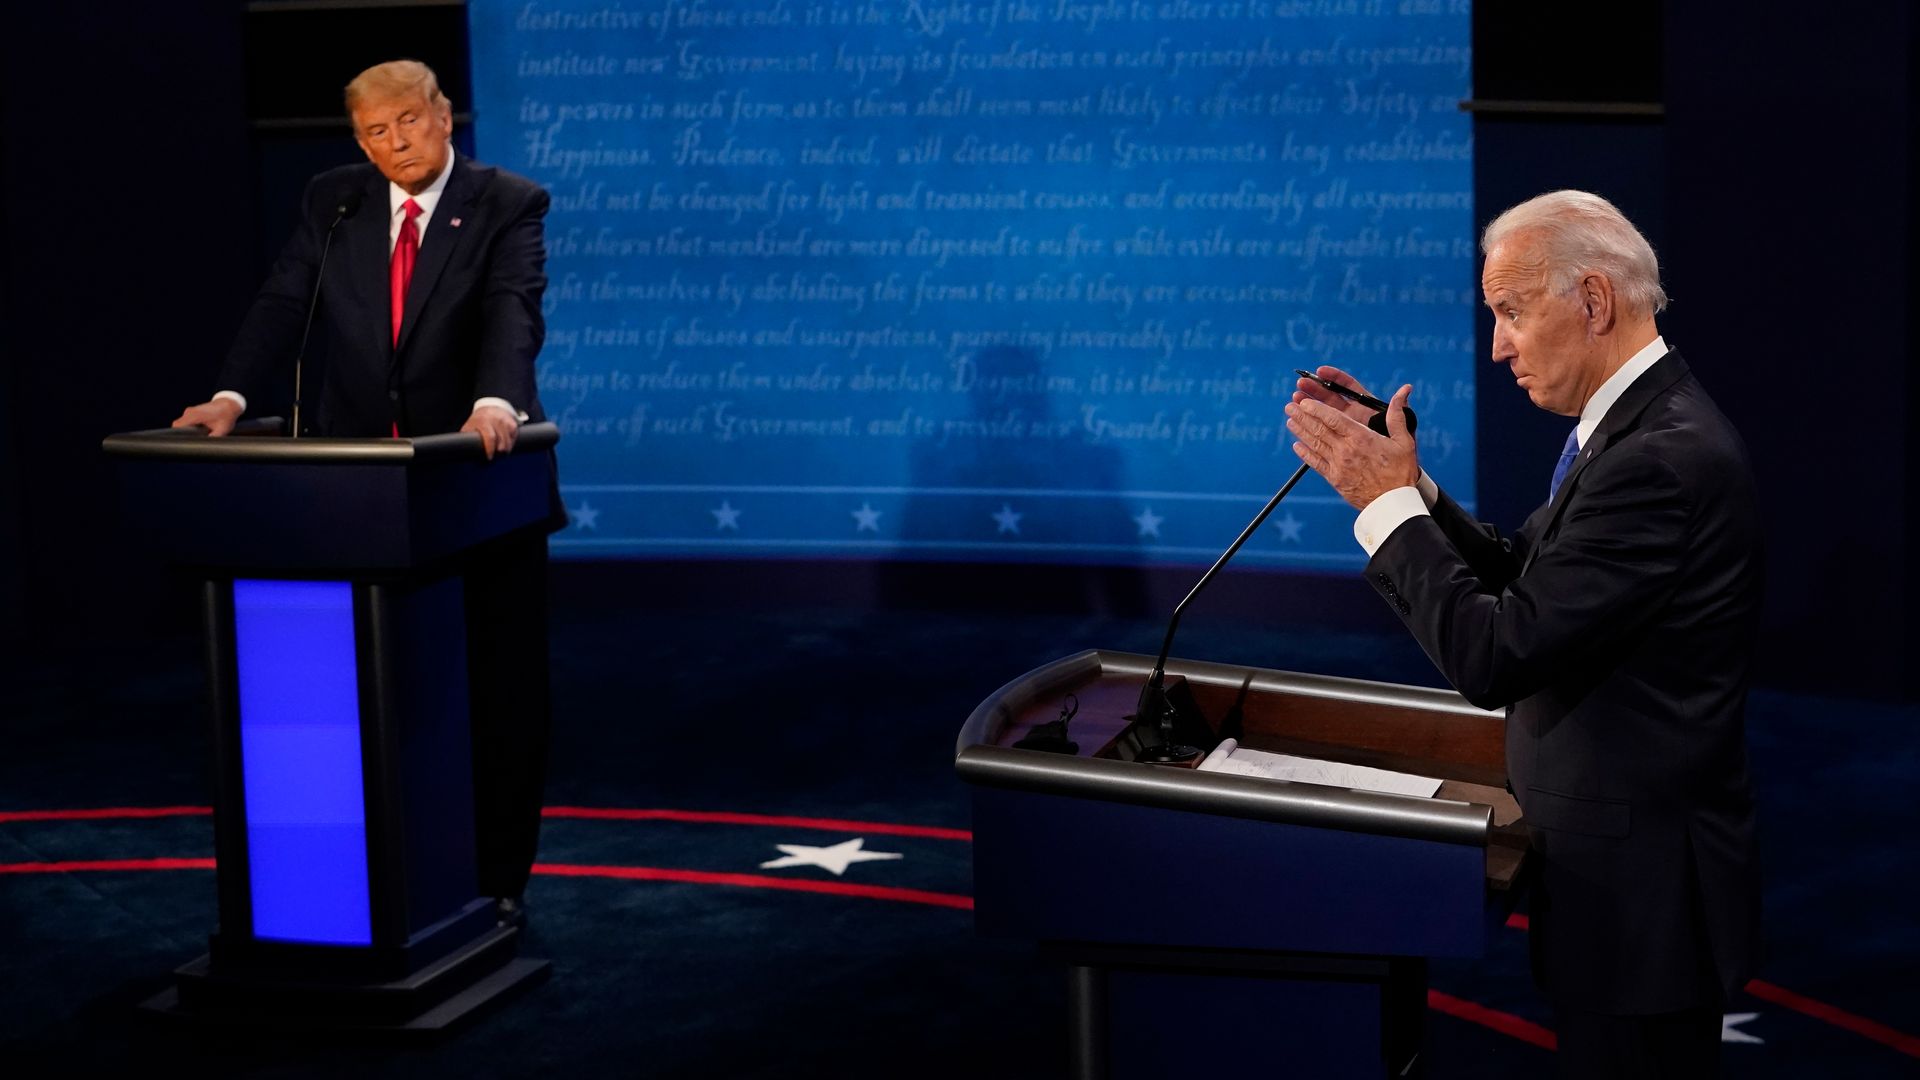 Then-President Trump and then-presidential candidate Joe Biden appear side-by-side during a debate